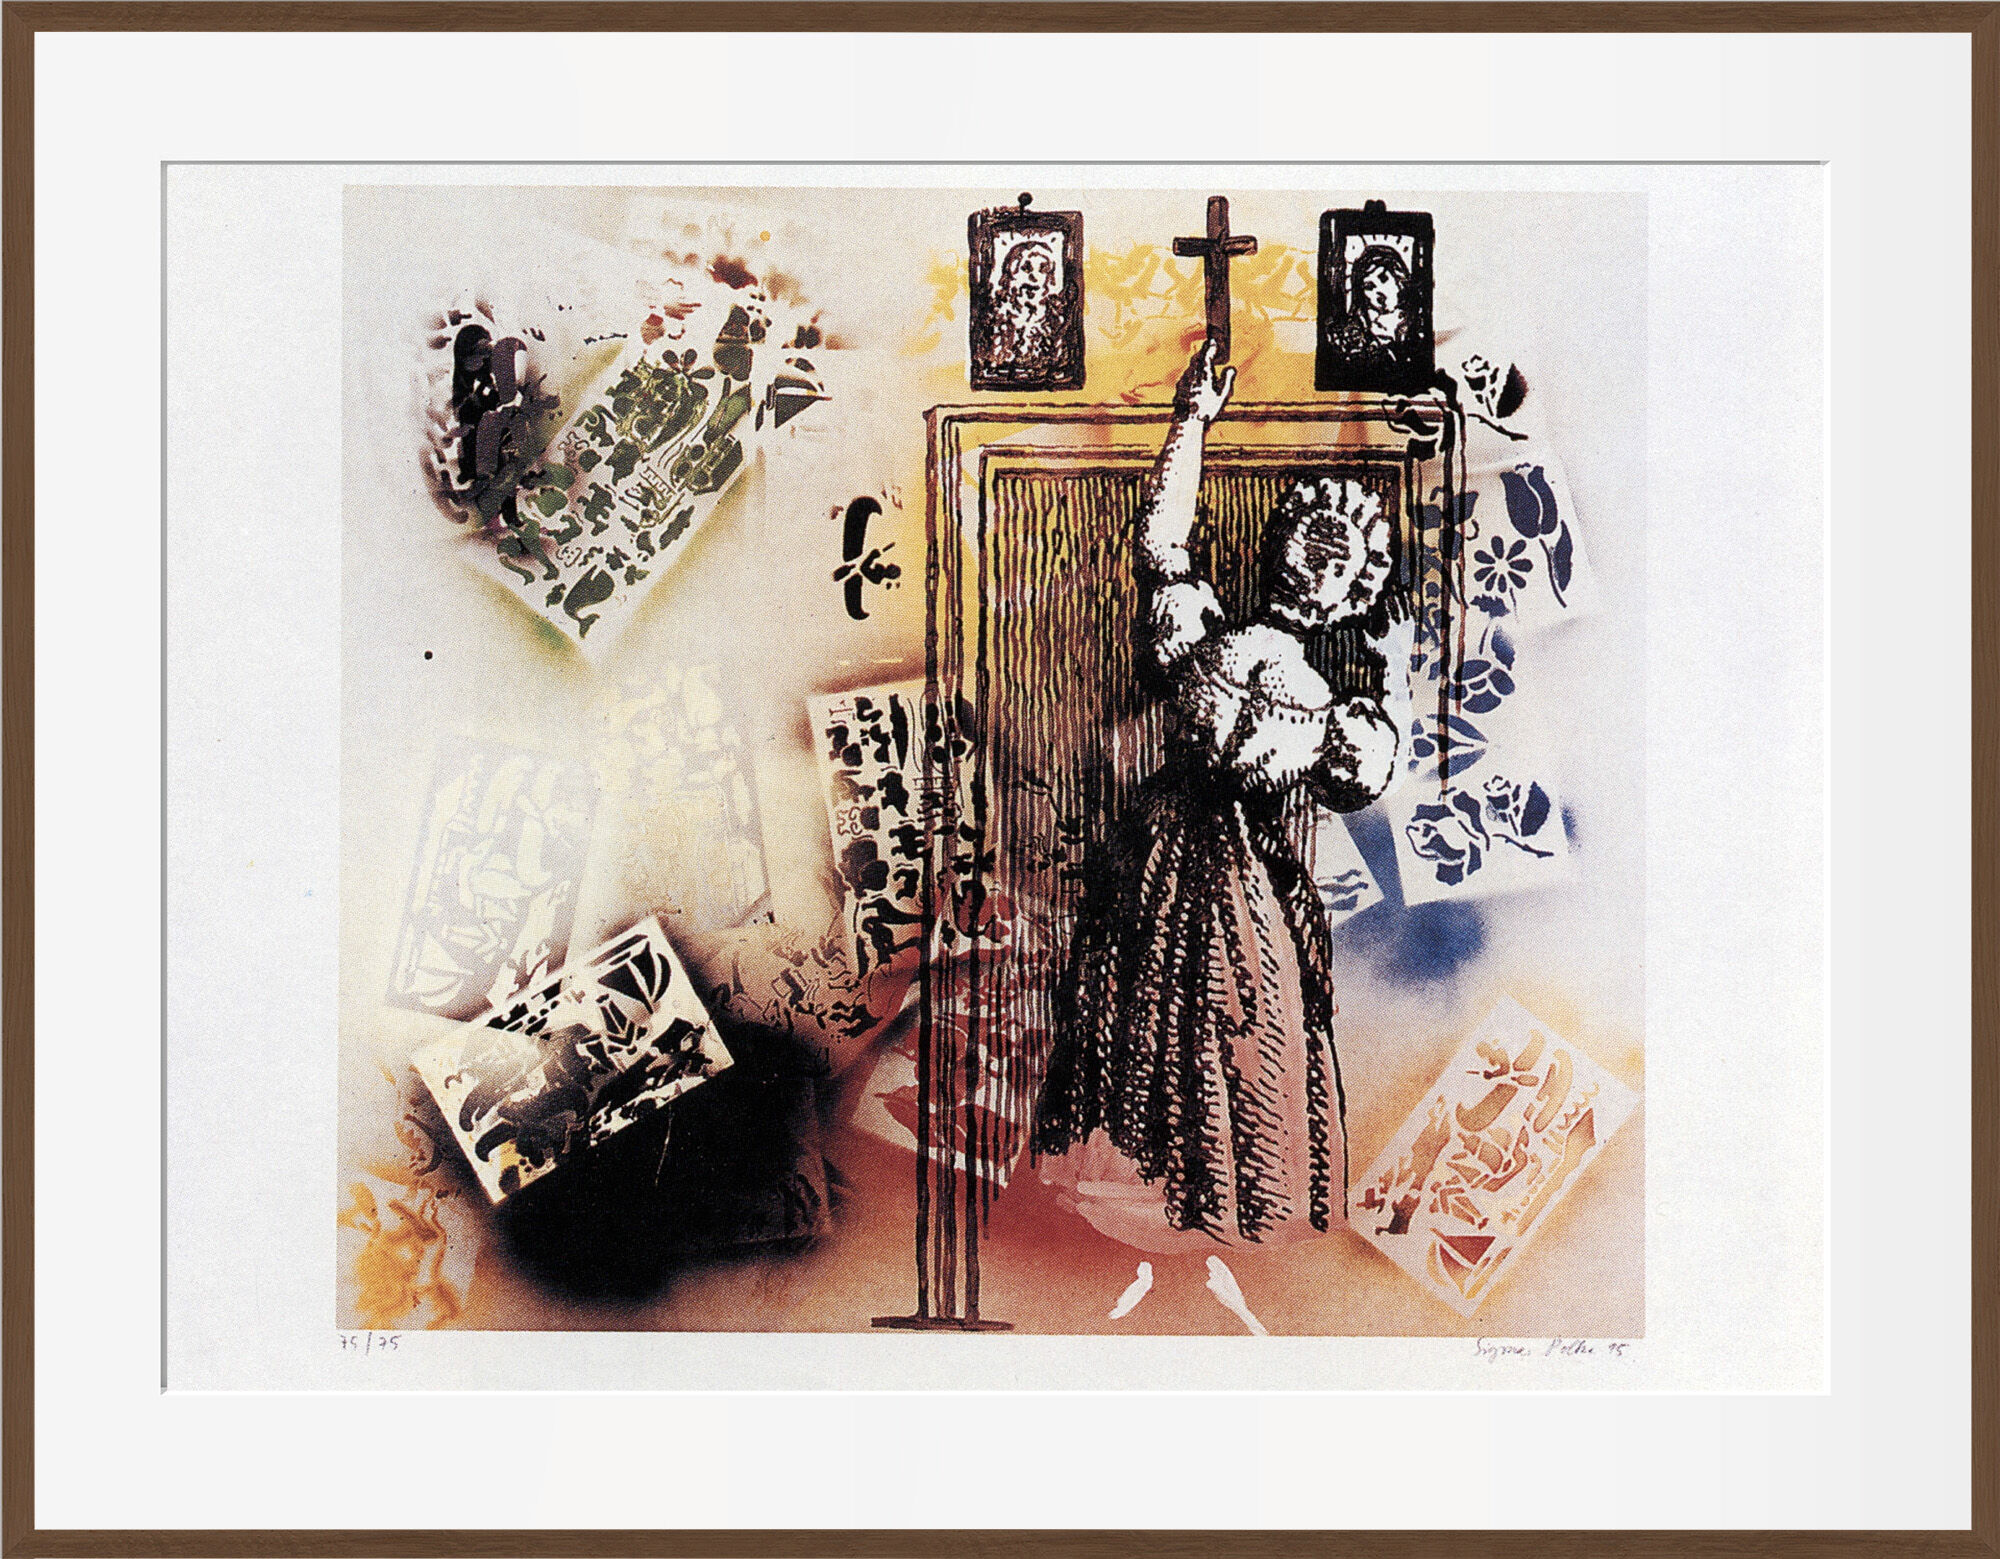 Picture "Classroom" (1995) by Sigmar Polke